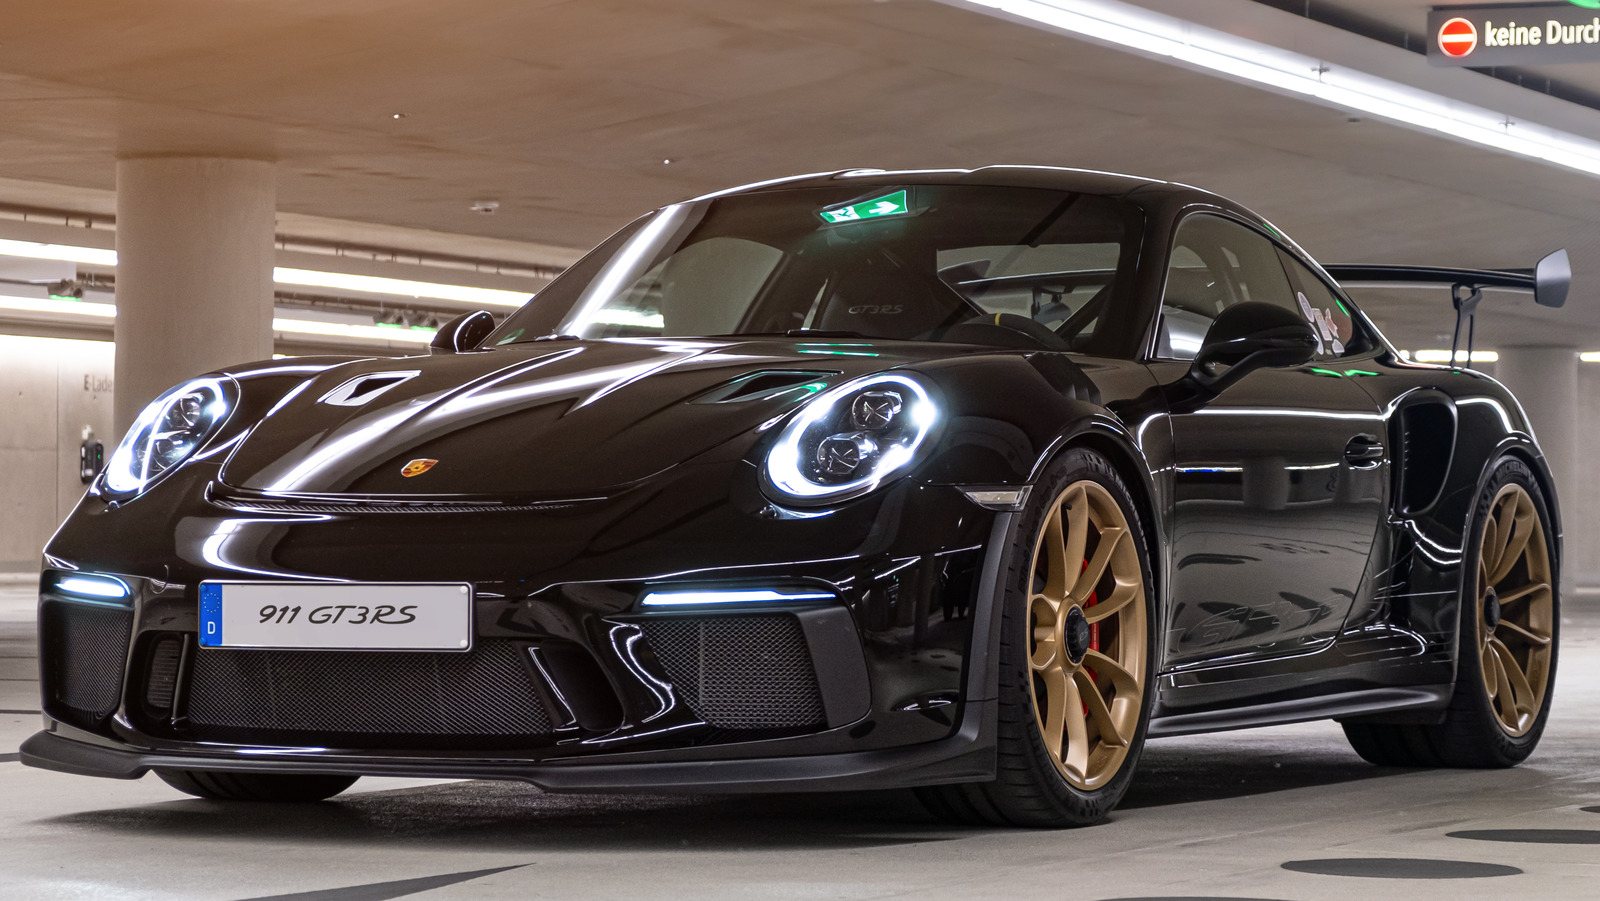 world-s-blackest-paint-meets-a-porsche-911-and-the-results-are-wild